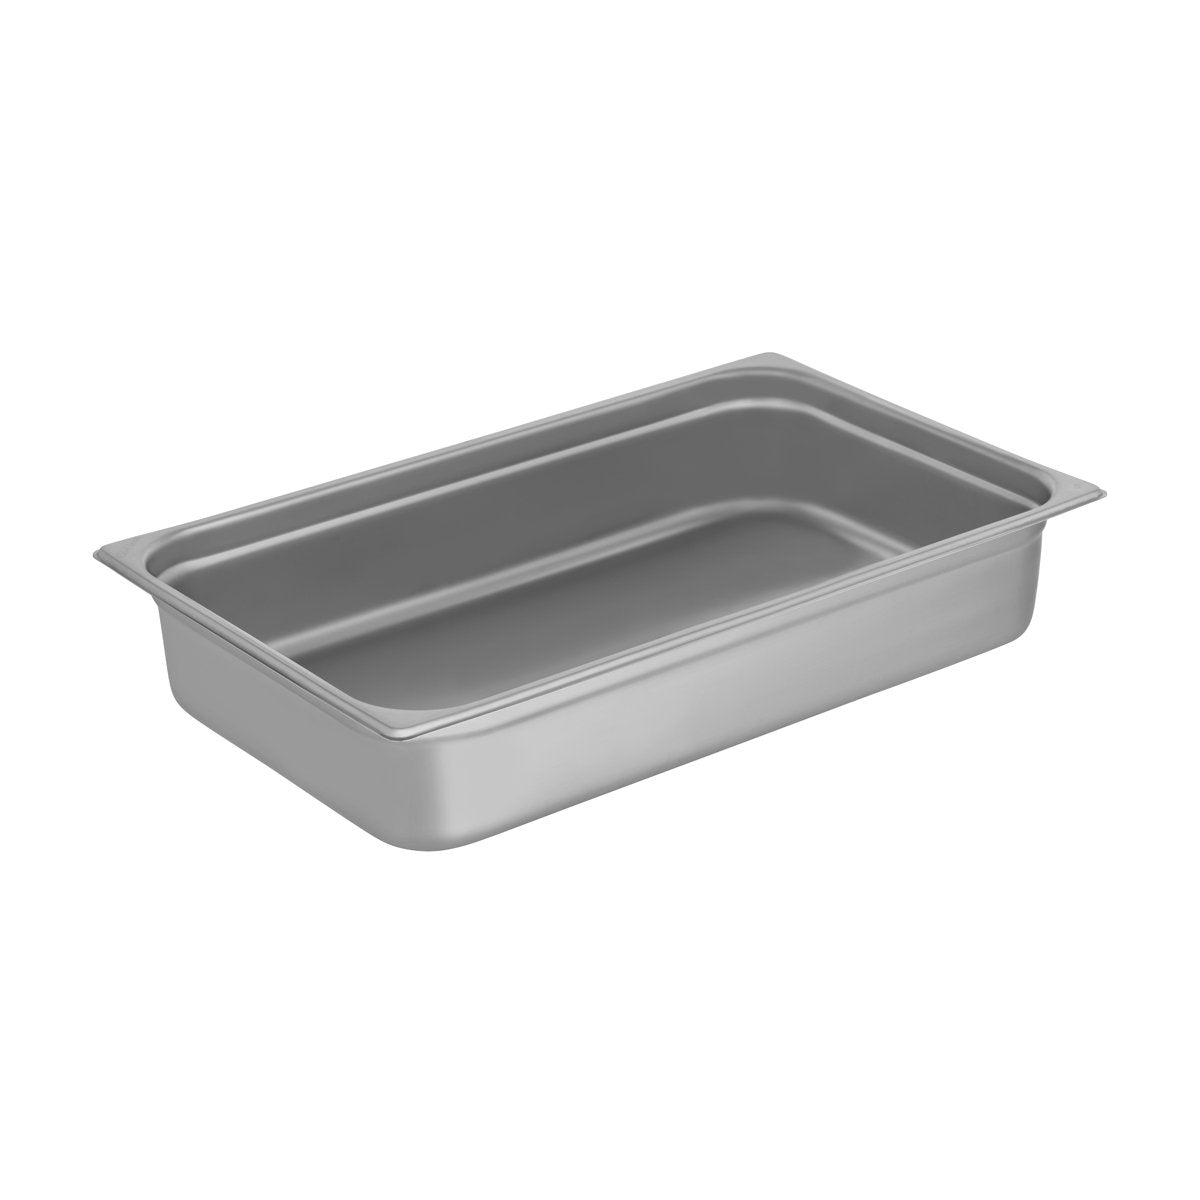 GN-11100 Chef Inox Gastronorm Pan 1/1 Size 100mm Tomkin Australia Hospitality Supplies